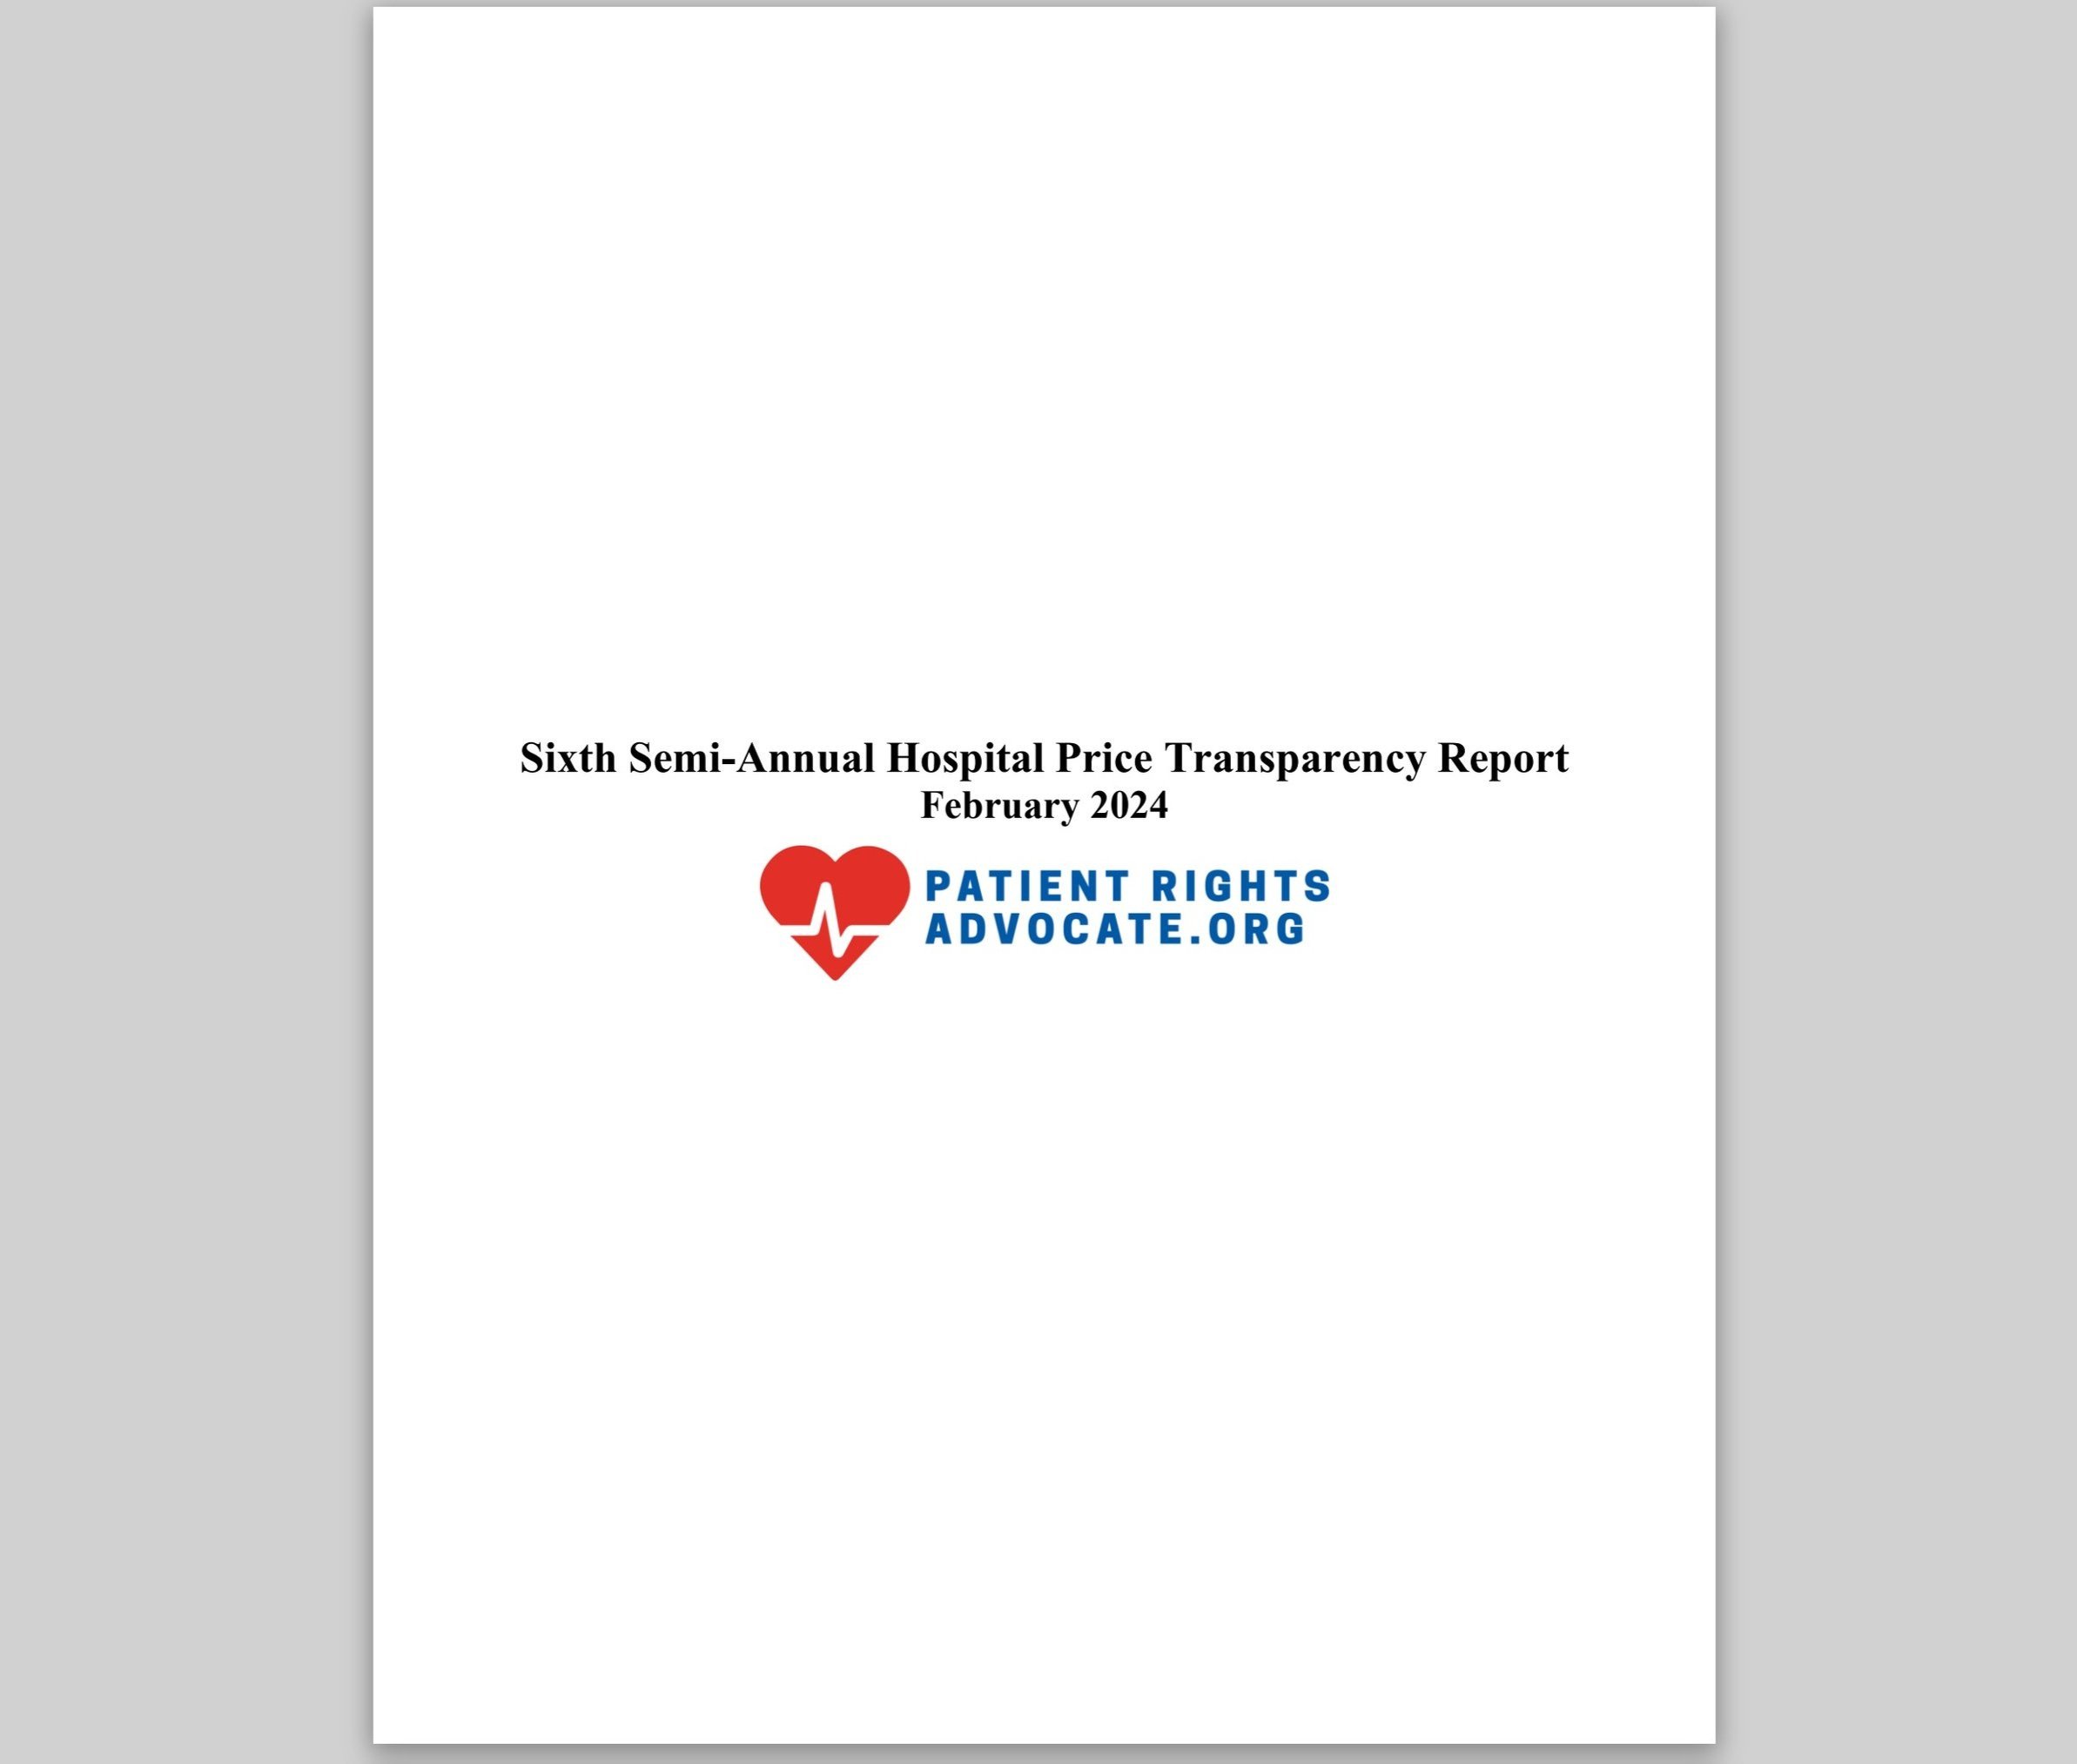 Sixth Semi-Annual Hospital Price Transparency Report